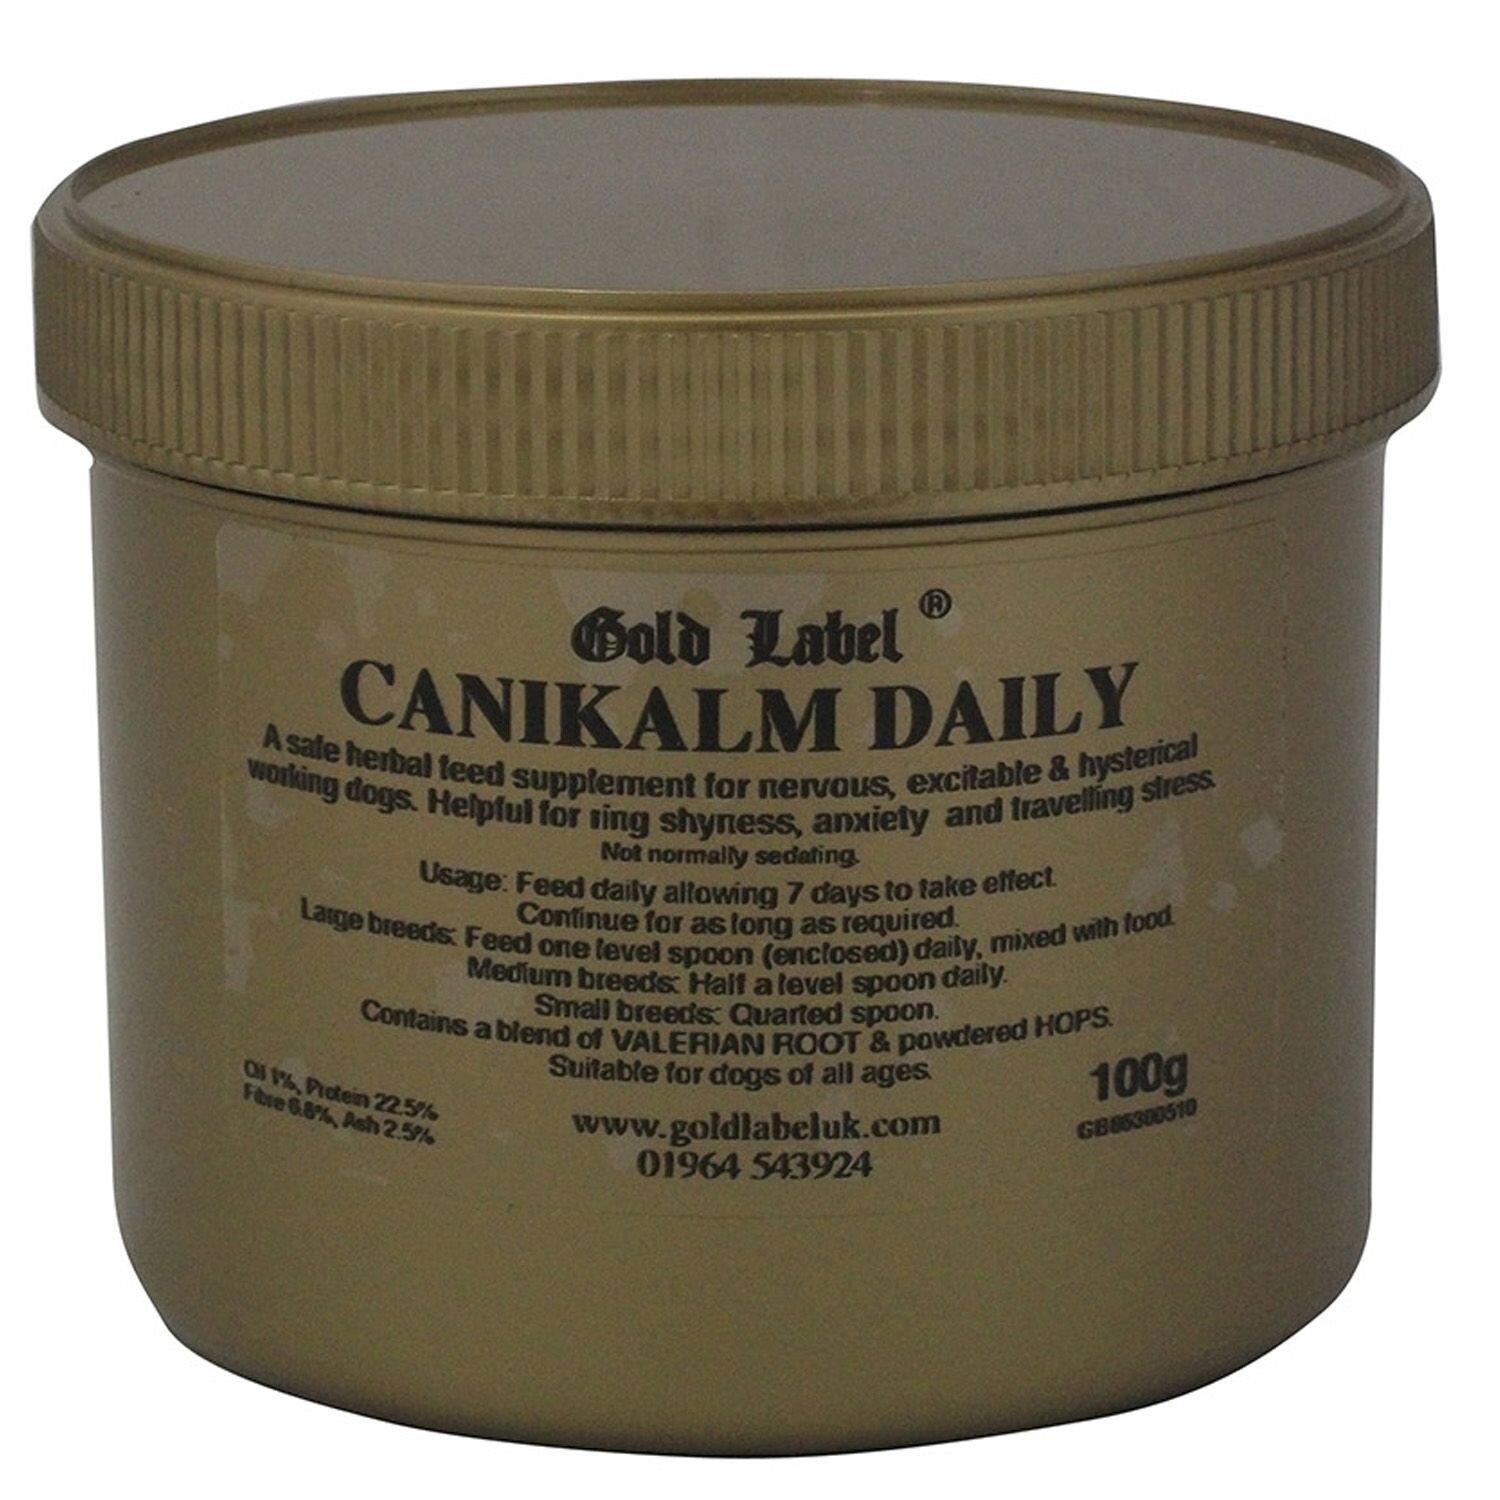 Gold Label Canikalm Daily - 100 Gm [CK]